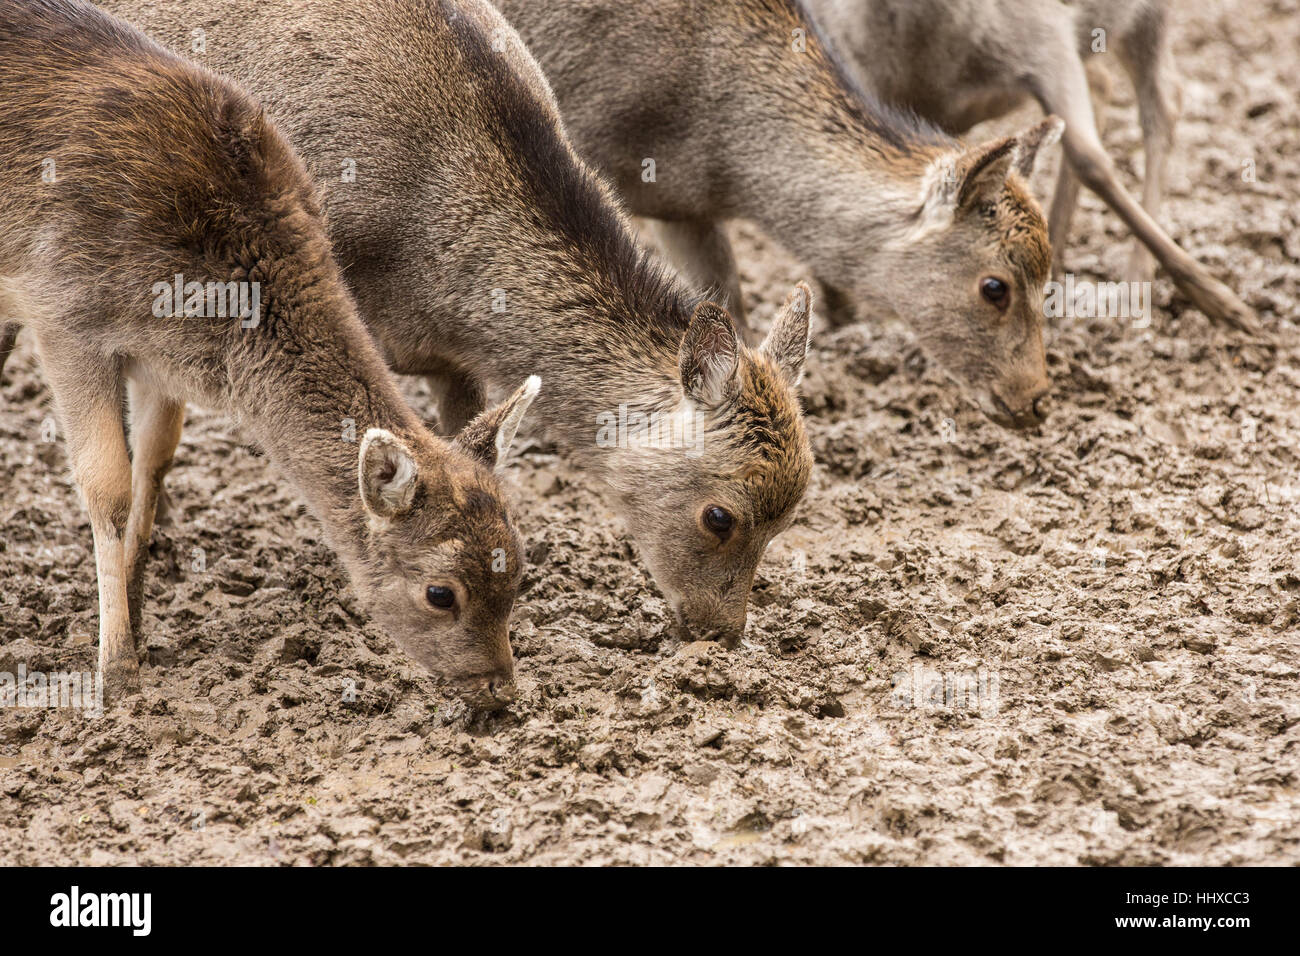 3 small deer searching for food in the mud Stock Photo